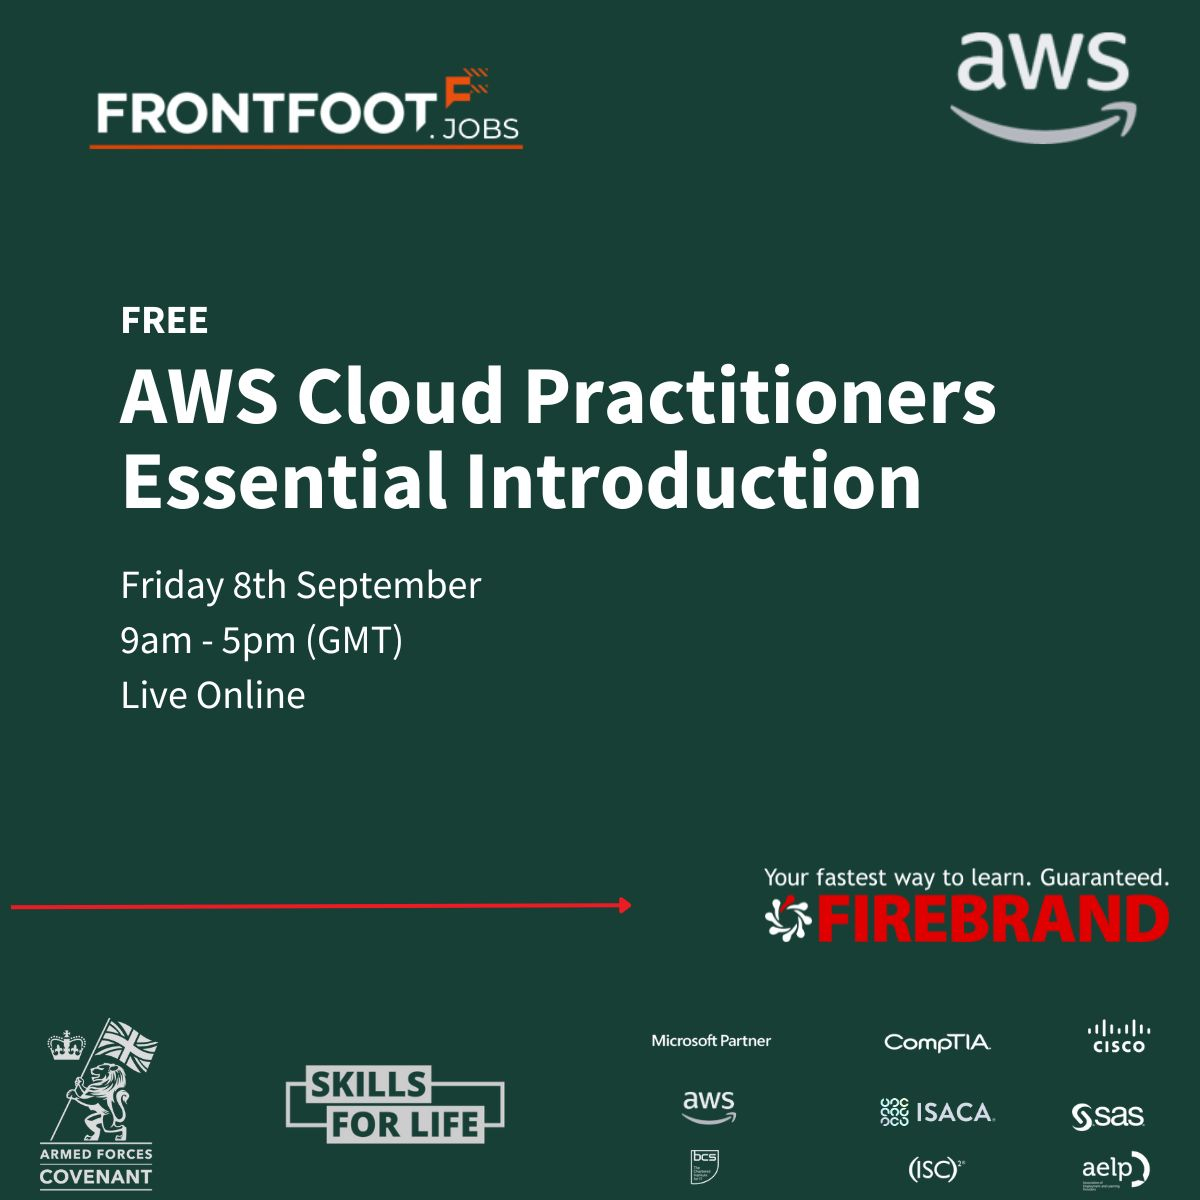 FrontFoot in partnership with Firebrand Training: FREE online AWS Cloud Practitioner Essentials Course on Friday 8th September from 9am – 5pm (GMT) Sign up: dlvr.it/SvTPL9 #BeAFirebrand #AWSCloudPractitioner #AWSFreeCourse #LearnAndGrow #FutureForward #Frontfootjobs